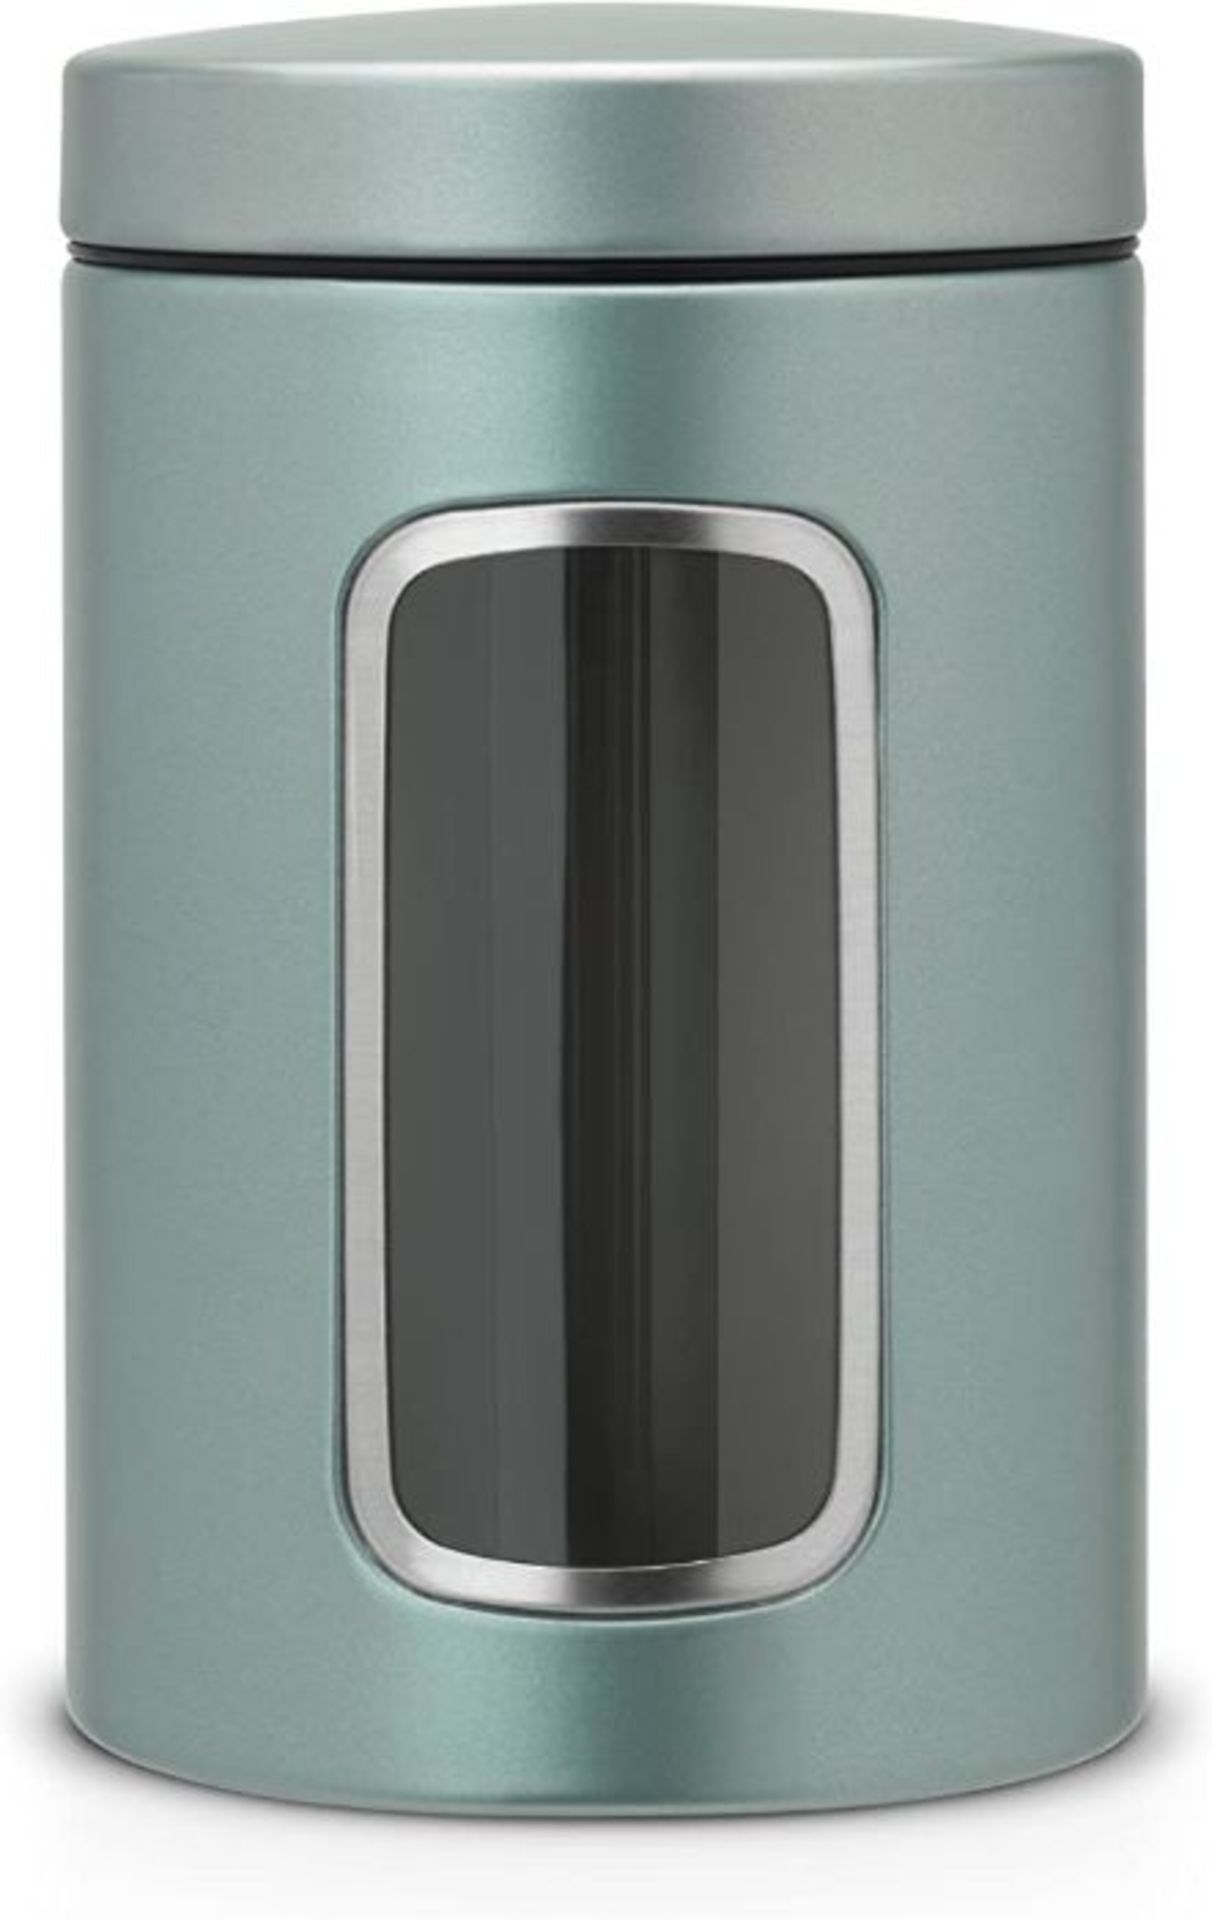 Brabantia 484360 Round Canister Jar with Window and Accessories, 1.4 L - Metallic Mint - RRP £8.